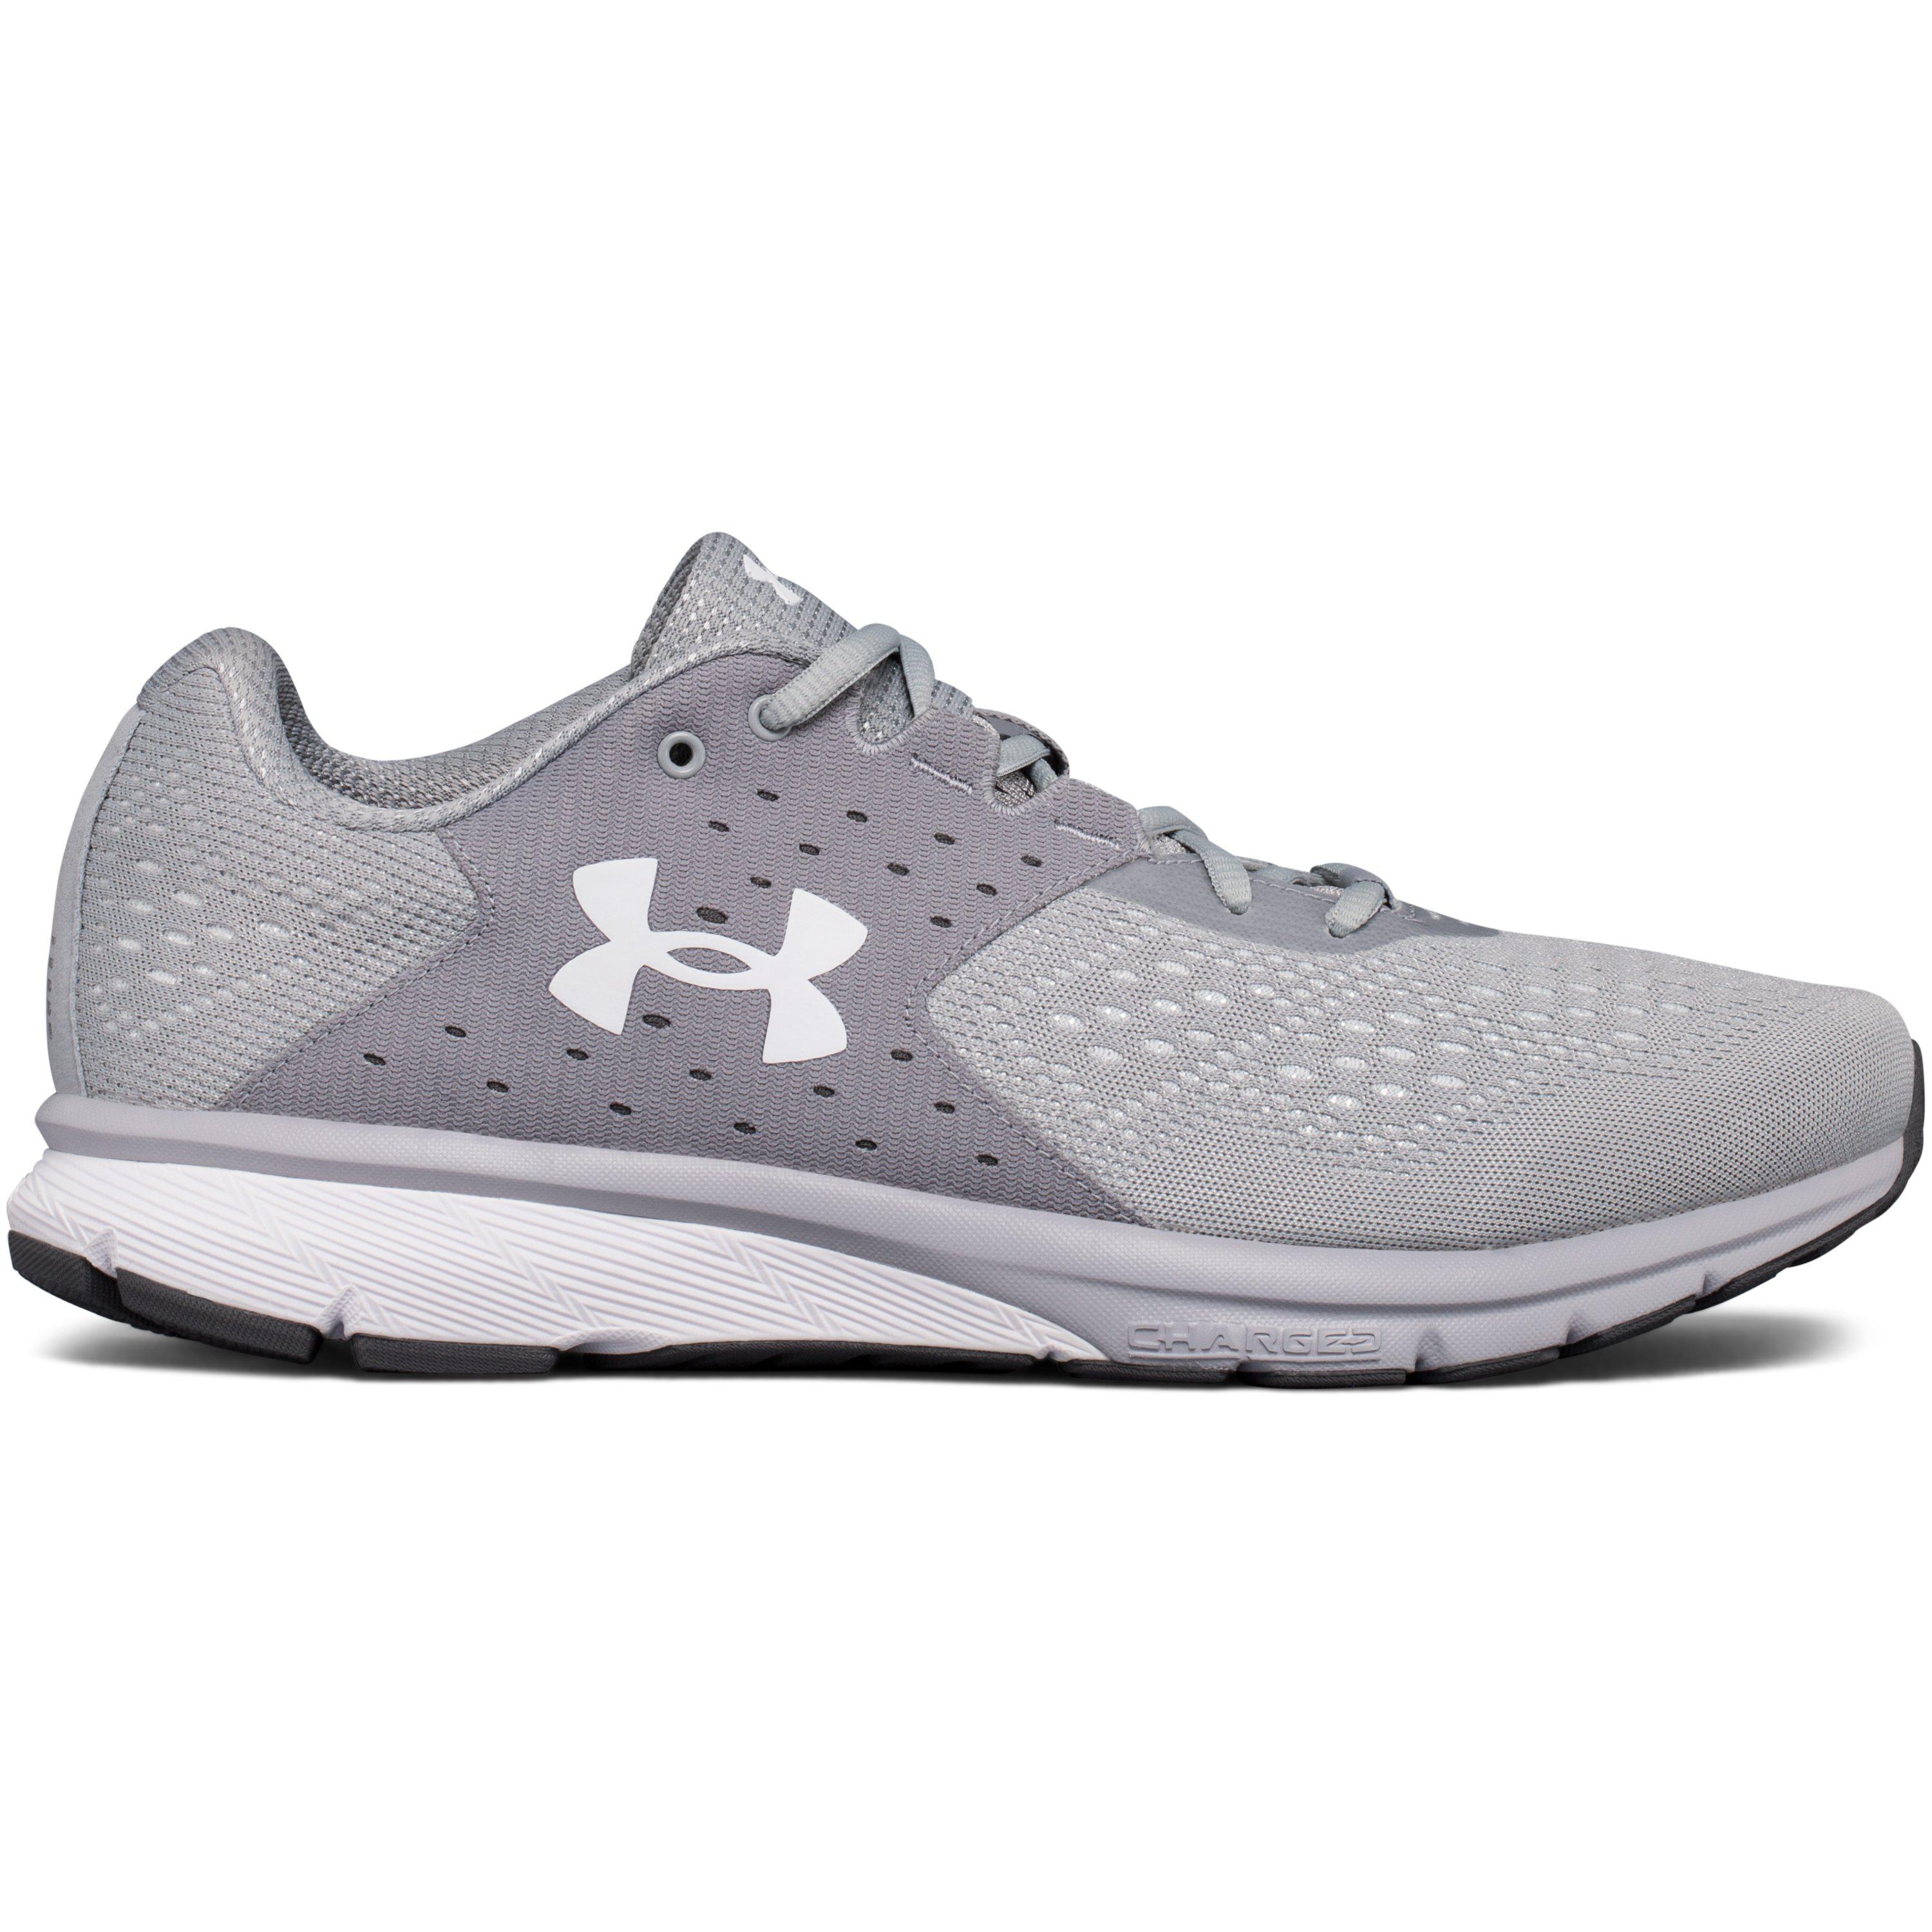 rebel under armour shoes